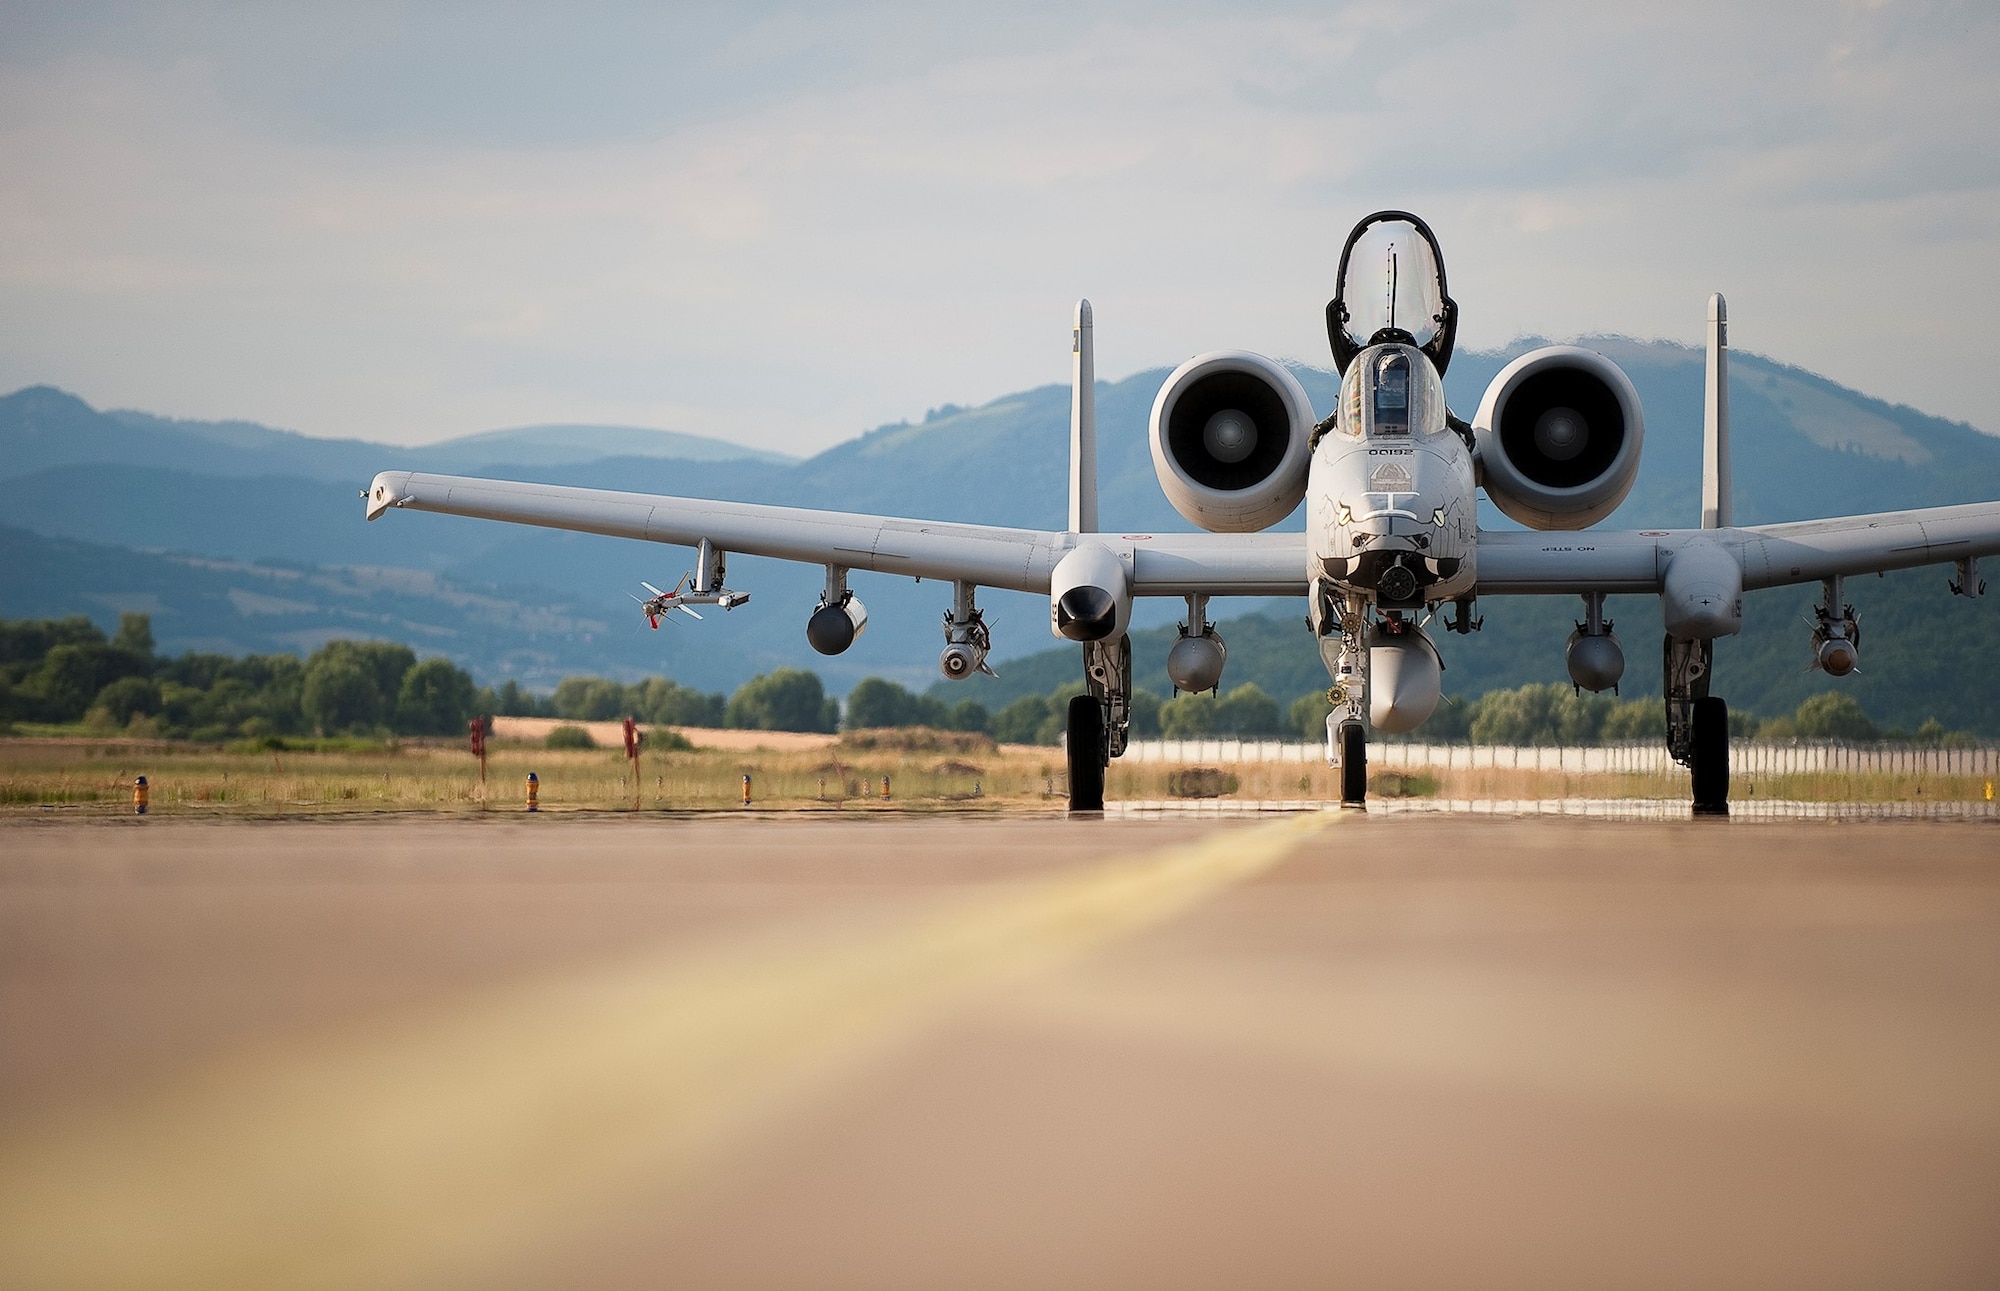 An A-10 Thunderbolt II from the 122nd Fighter Wing, Fort Wayne Air Station, Indiana taxis after landing at Sliac Air Base, Slovakia July 8, 2016. The A-10s are in Slovakia to conduct training alongside our NATO ally as well as participate in cross-border training with other deployed U.S. forces' aircraft and NATO aircraft in the area. (Air National Guard photo/ Staff Sgt. William Hopper)